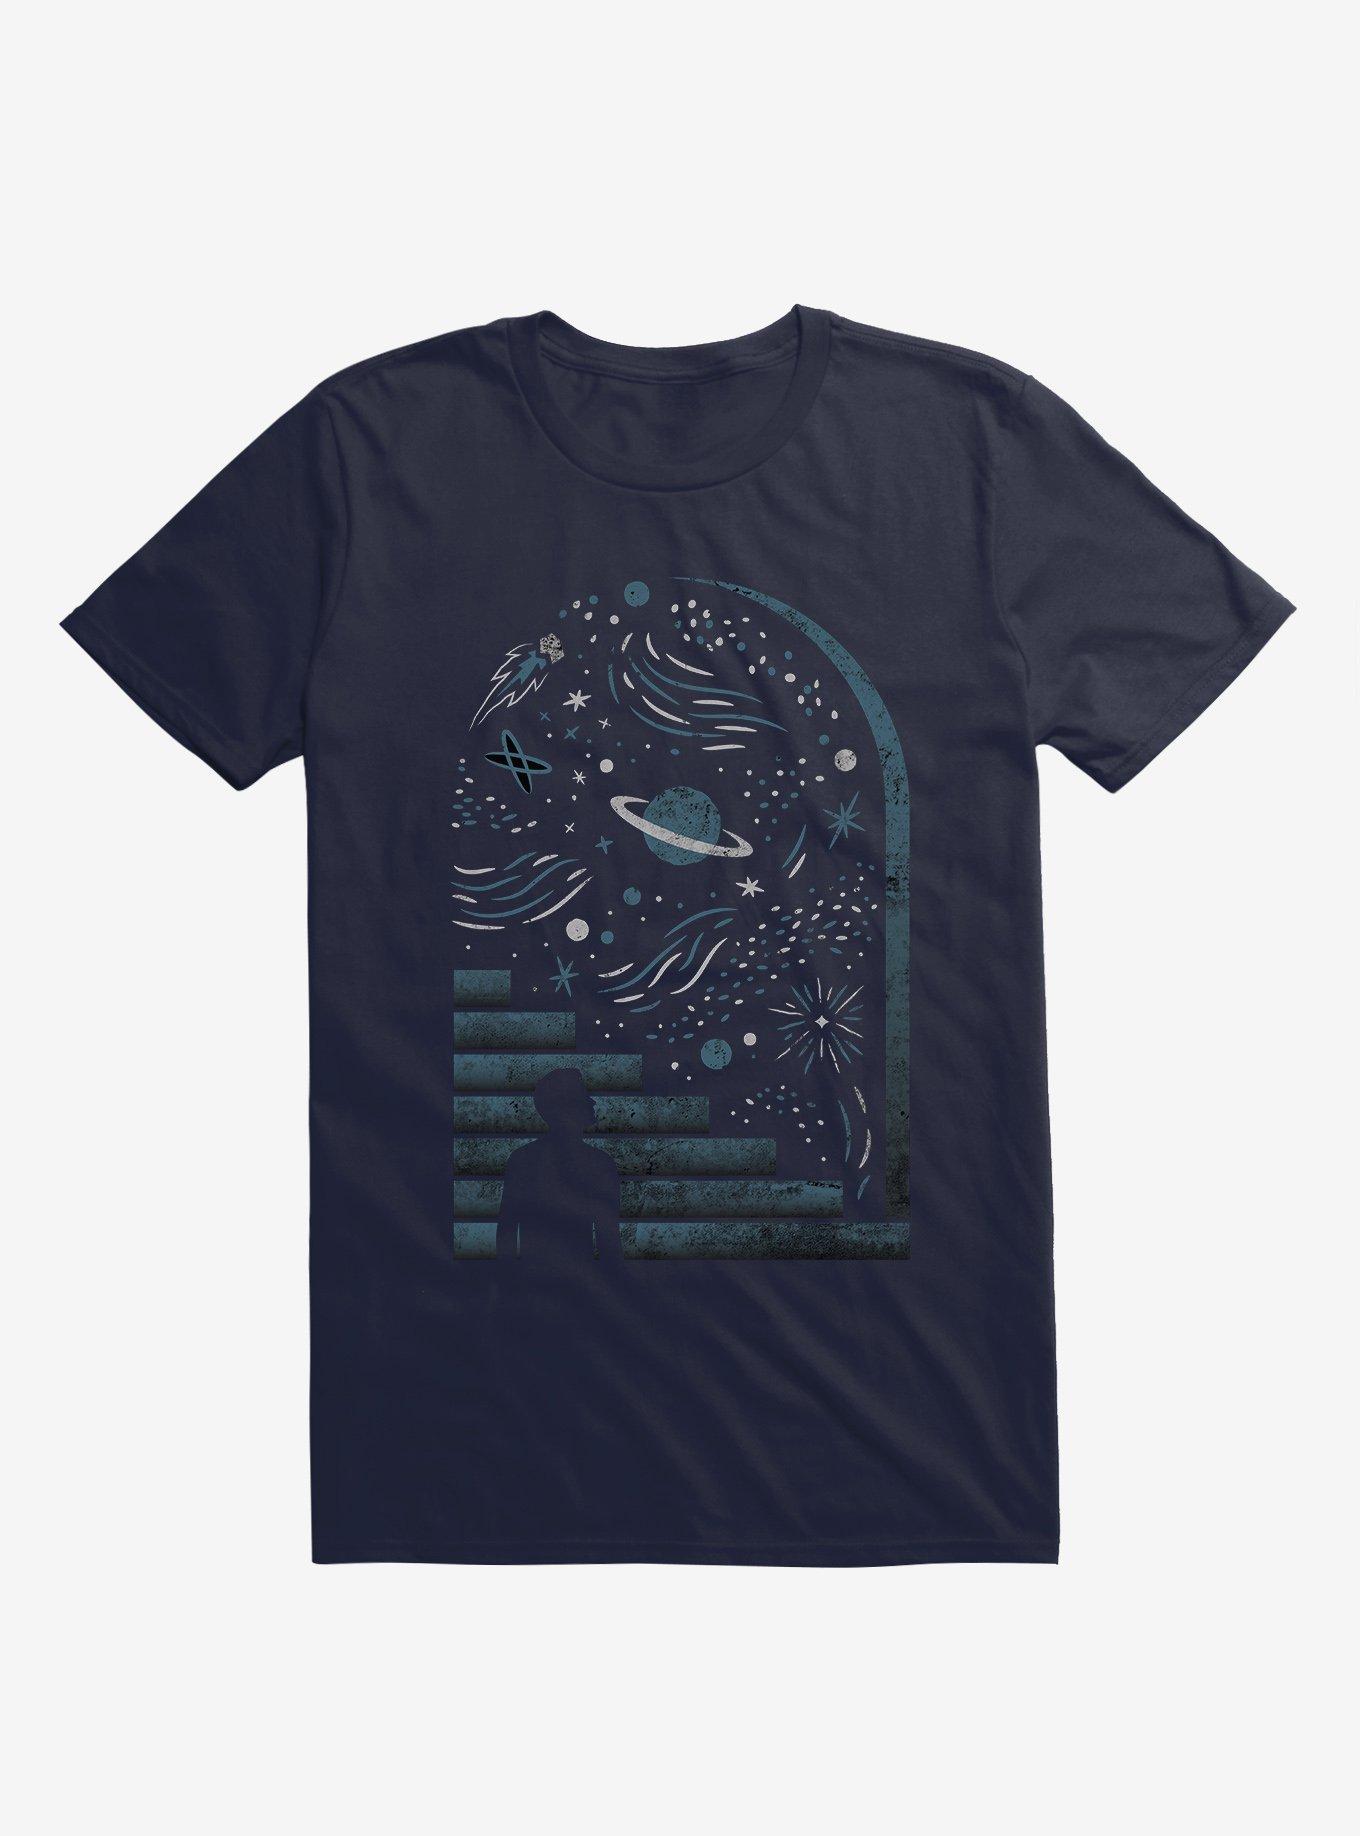 Open Space Stars And Planets Navy Blue T-Shirt, NAVY, hi-res